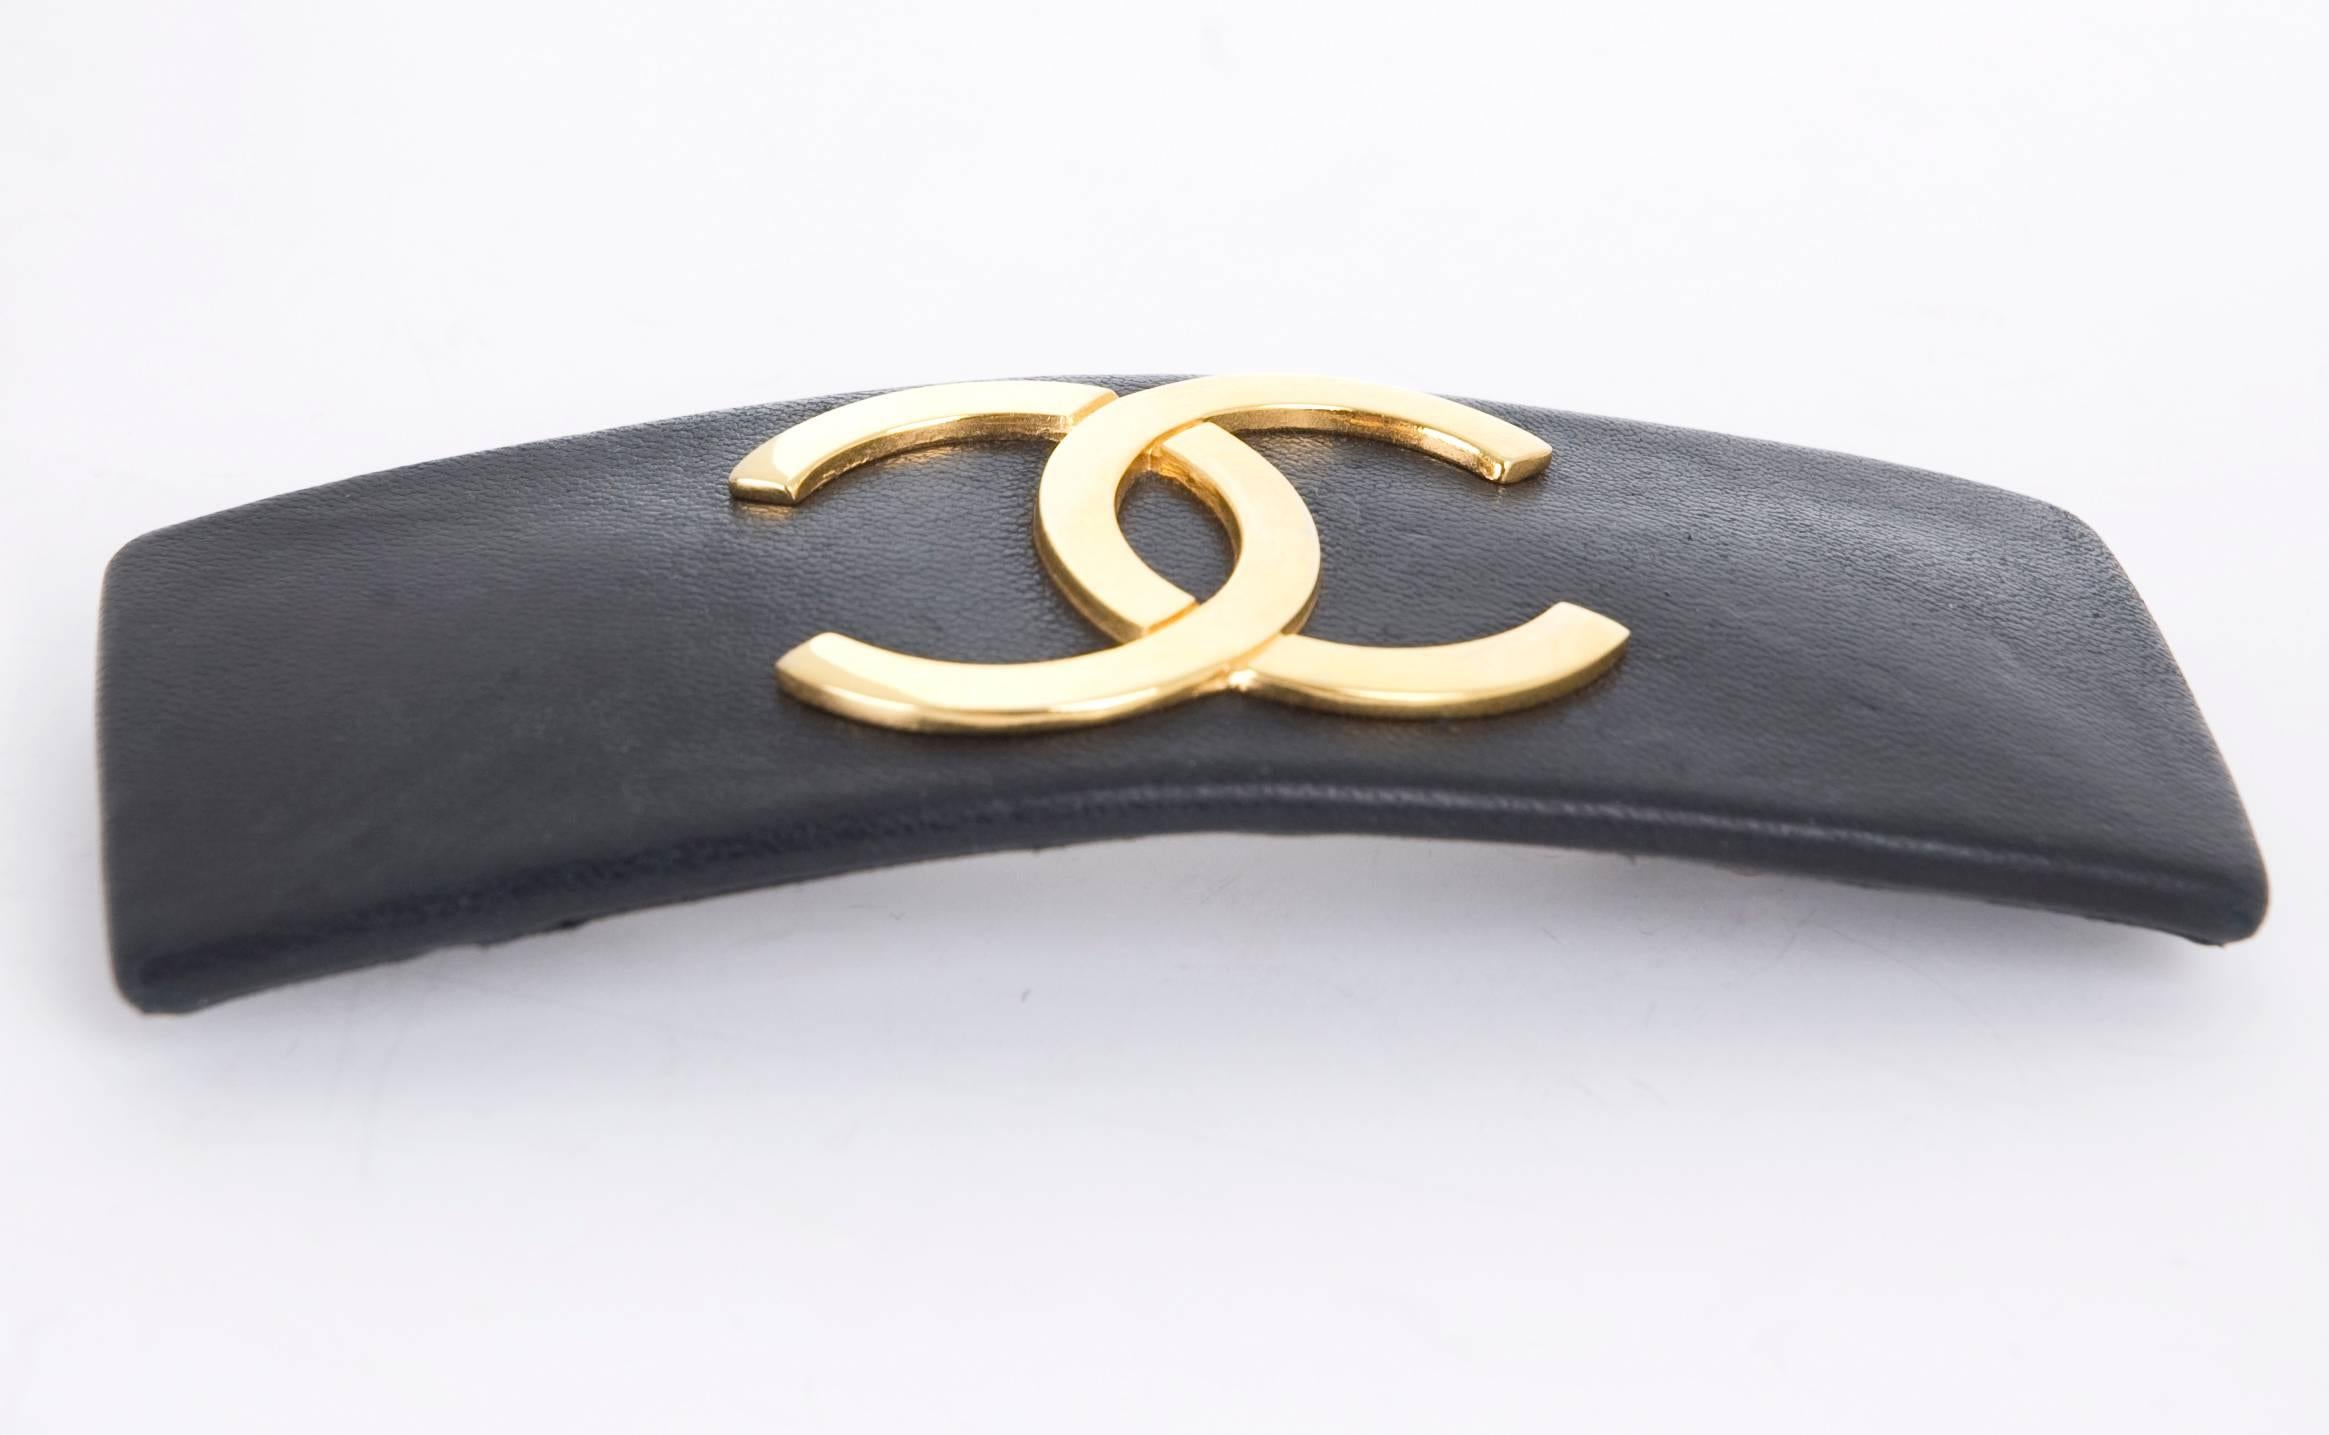 Vintage 70's Chanel Hair Clip Black Leather and Gilded CC Logo.
Excellent condition with some light cuffs to the leather surface.
Size: 4,25 width x 1,5 high

